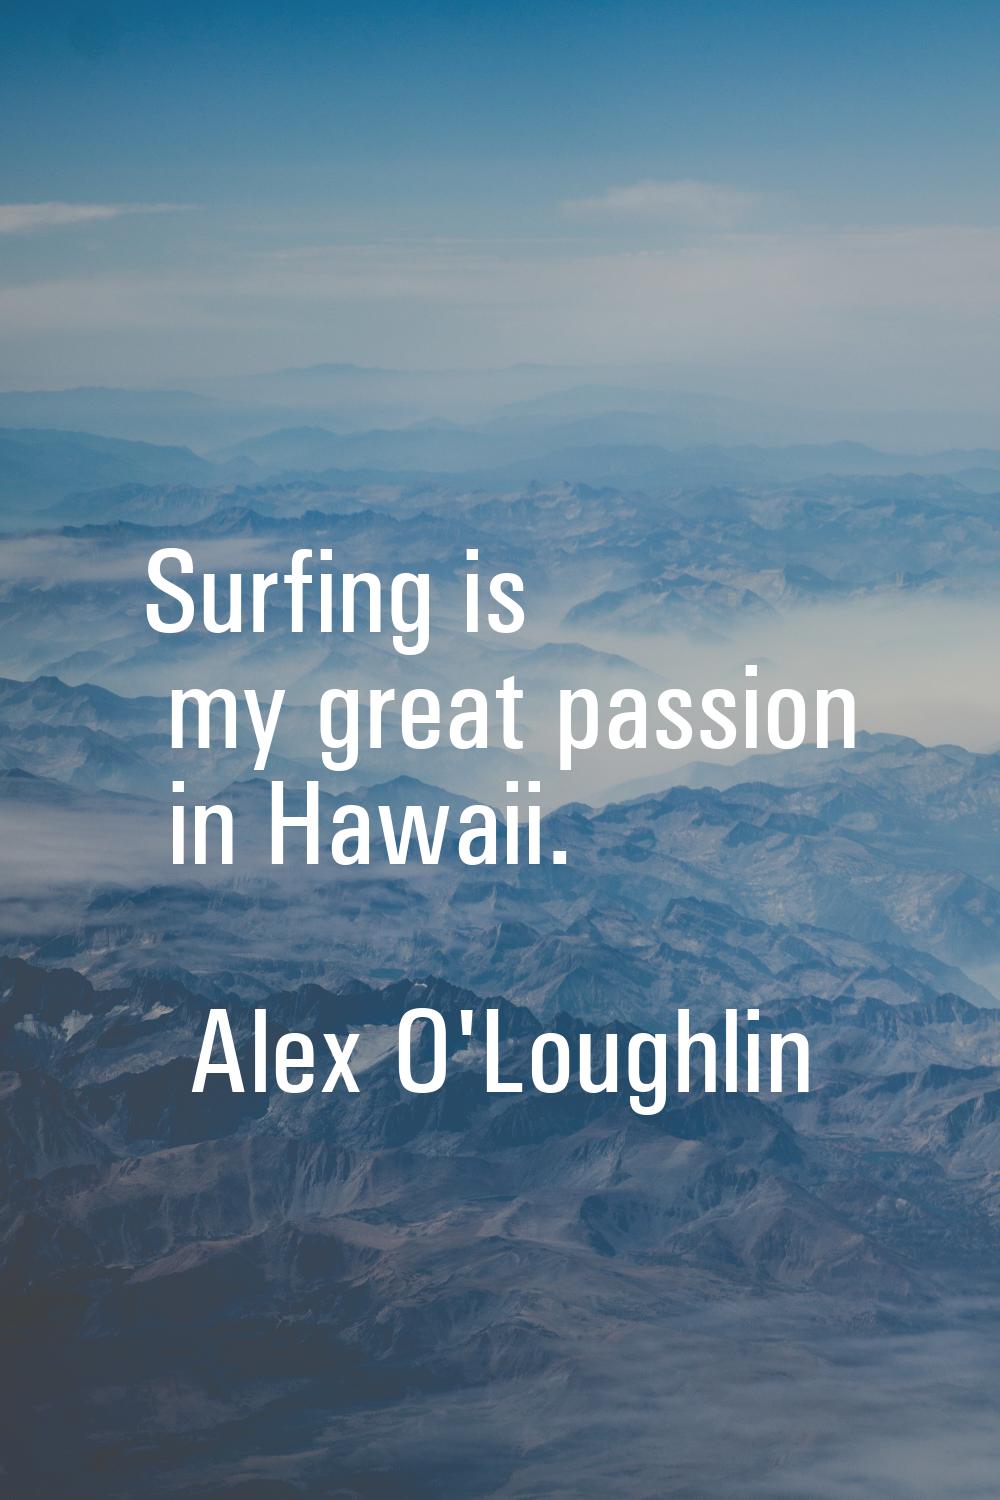 Surfing is my great passion in Hawaii.